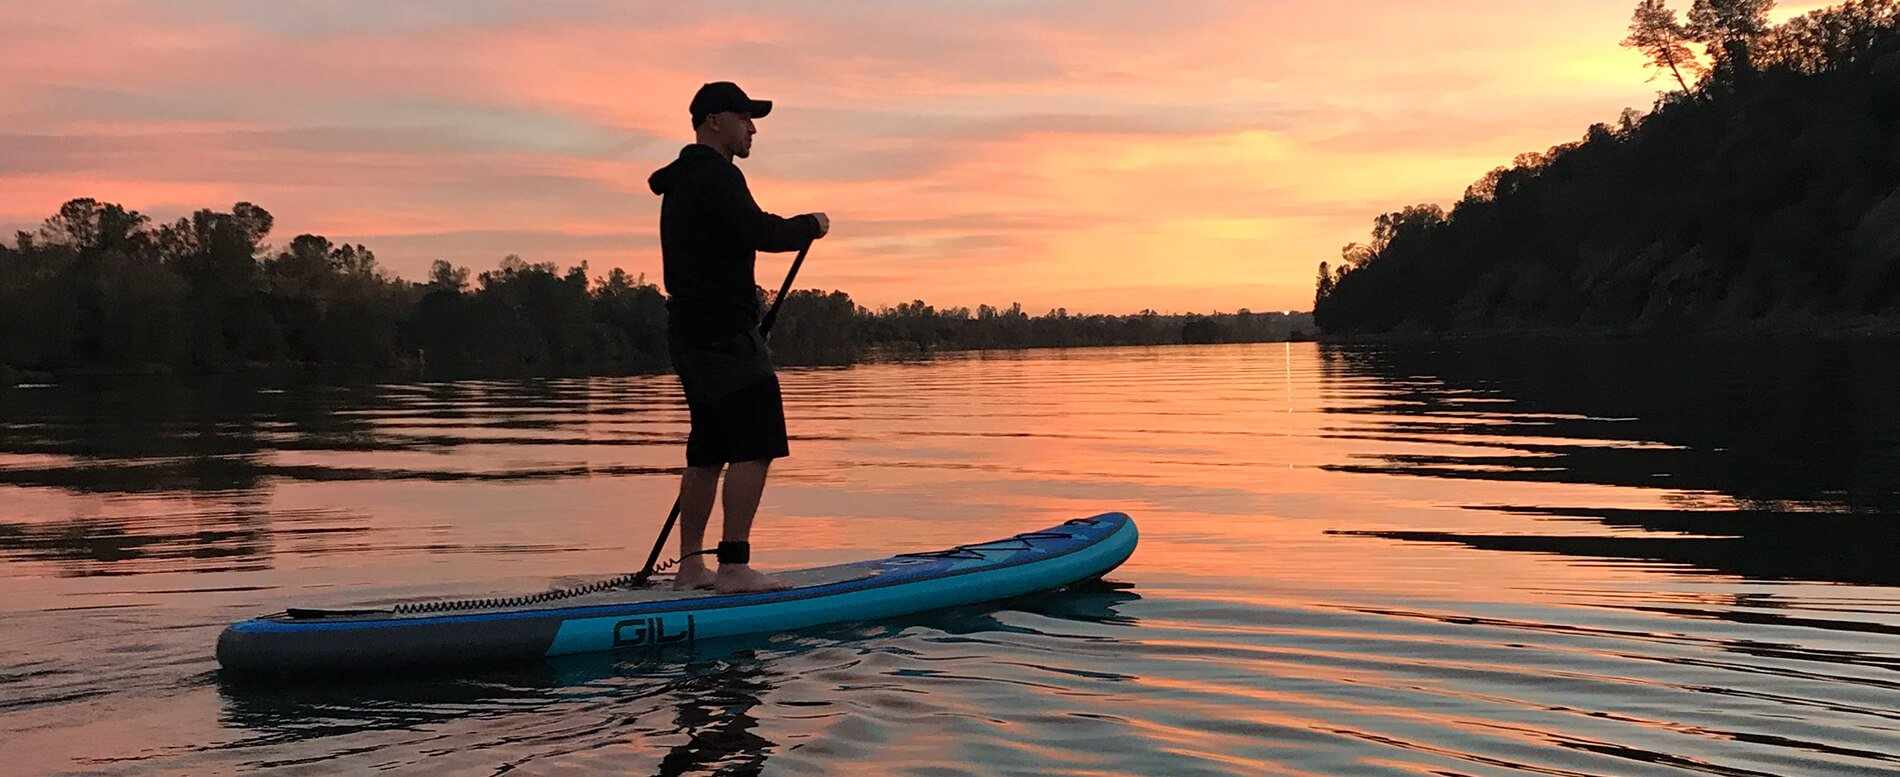 SUP Clothing: What To Wear Paddle Boarding: All Seasons (2020)